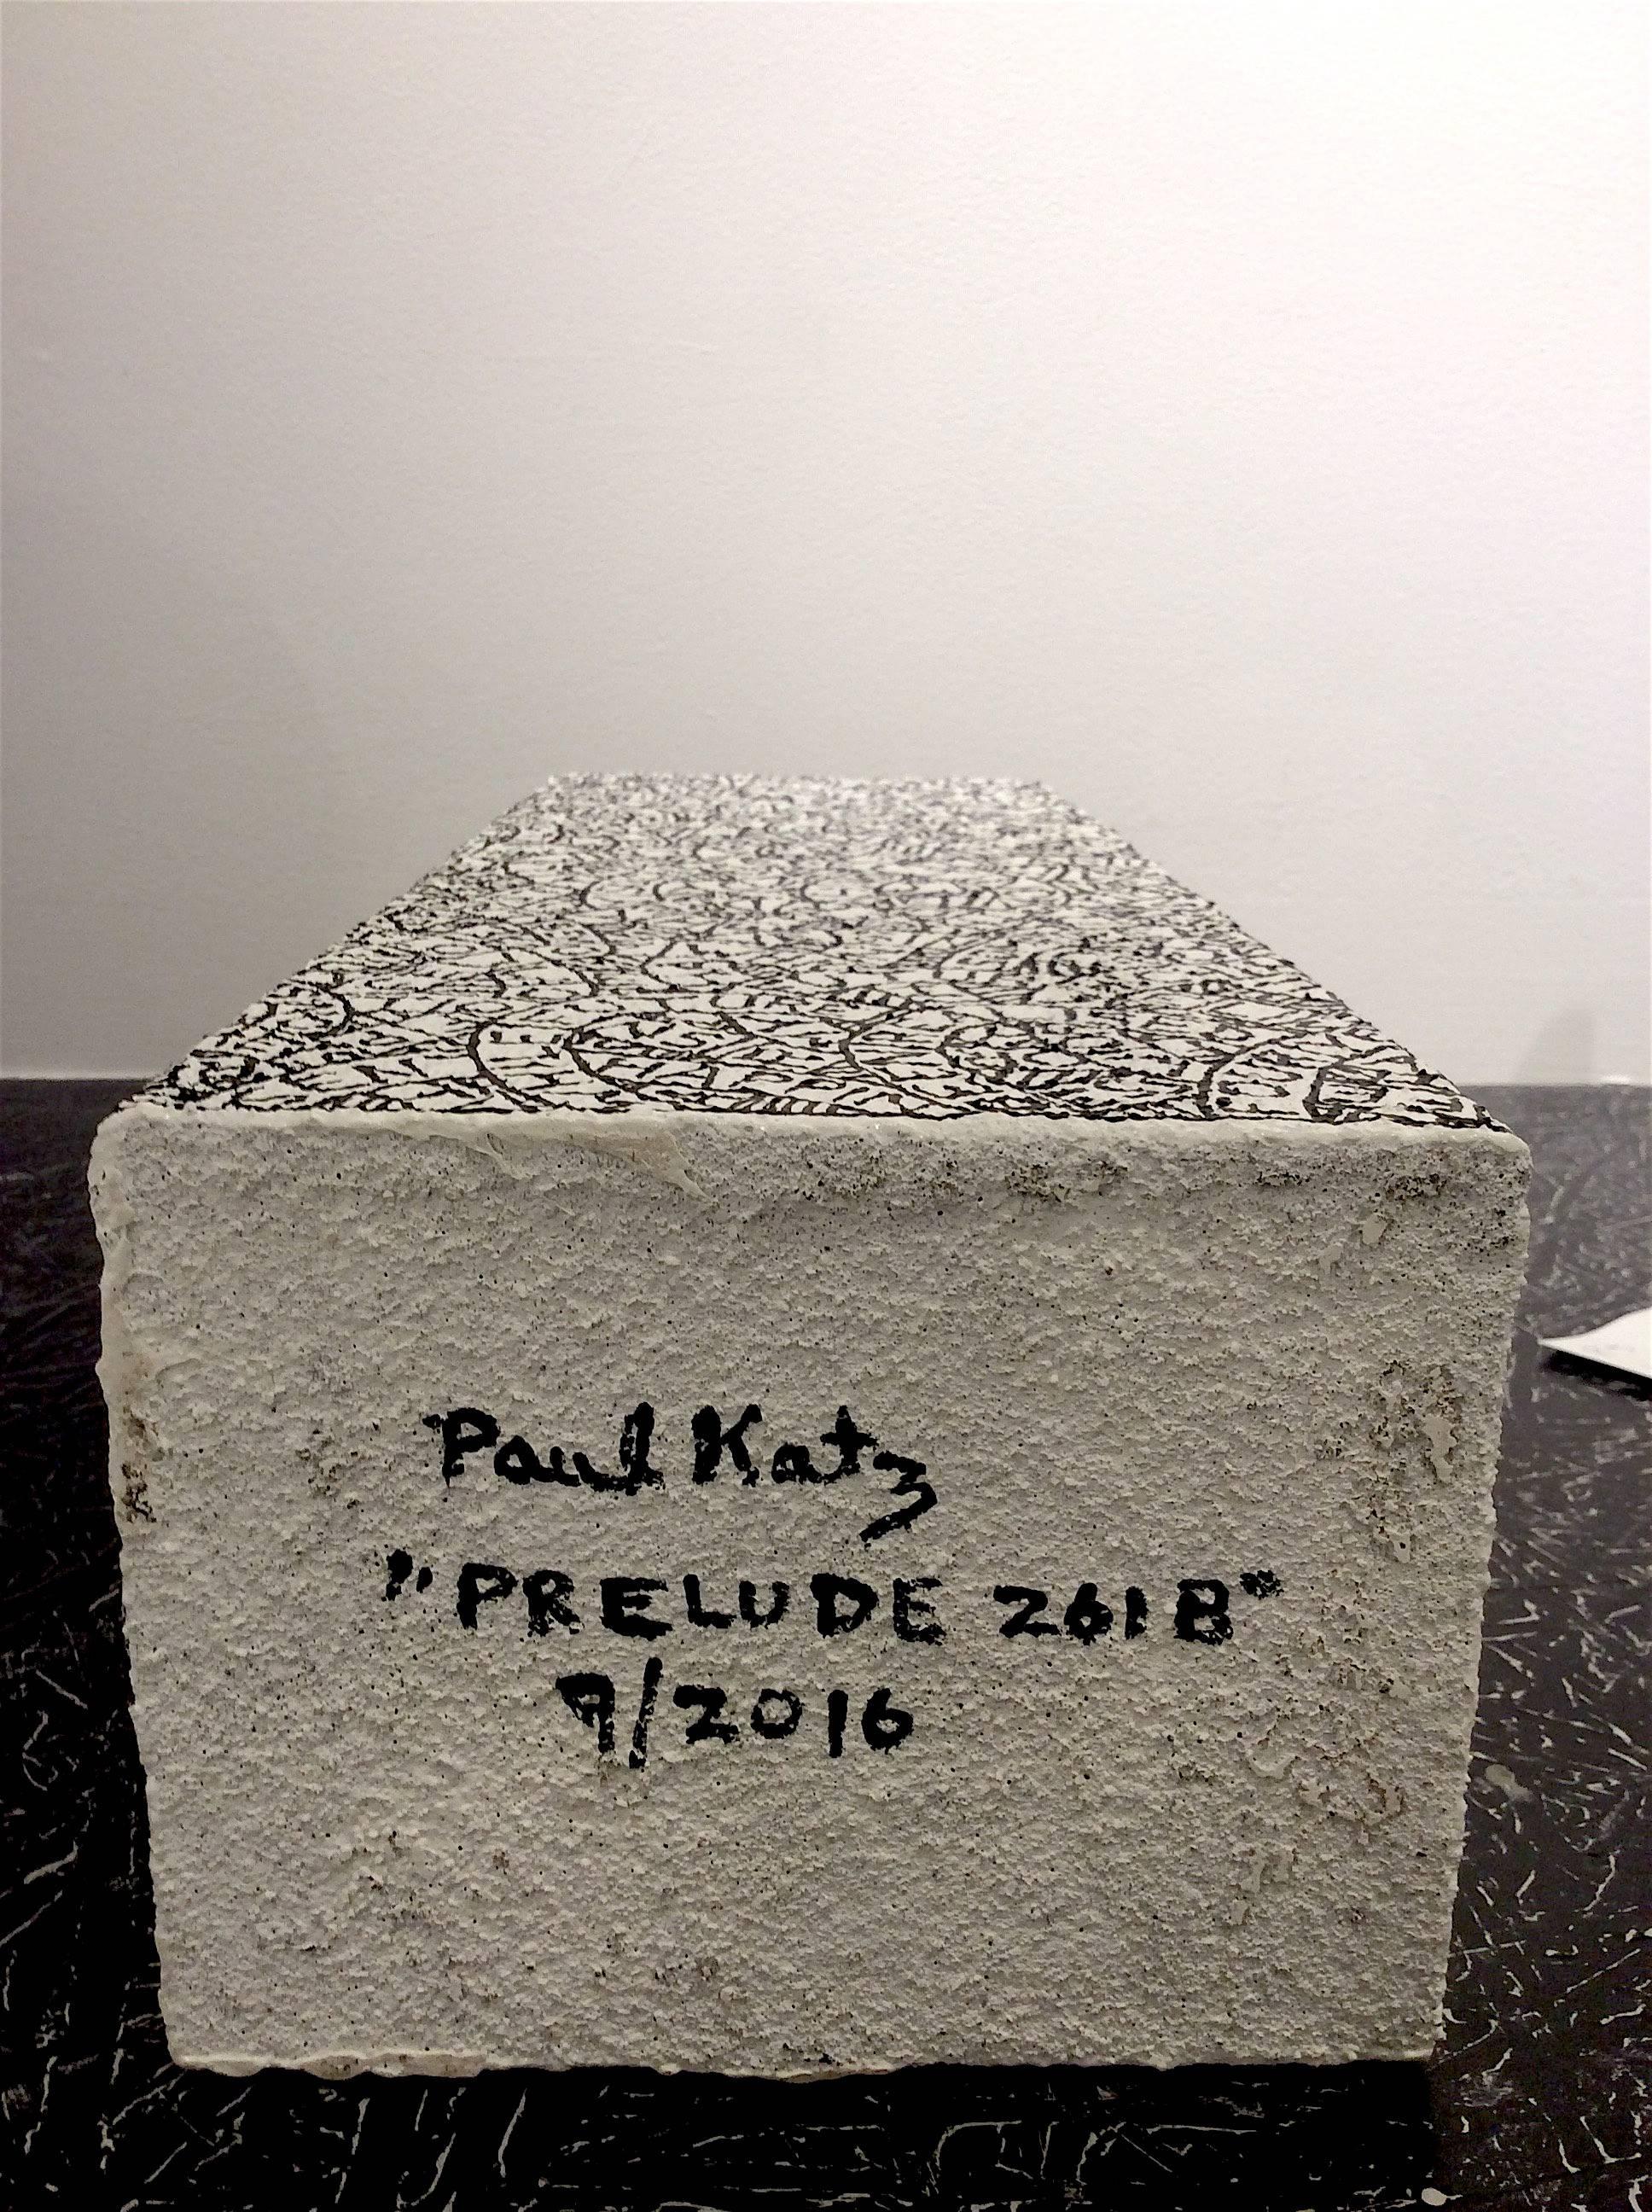 Prelude No. 261 (Black and White Plaster and Found Object Sculpture) 5